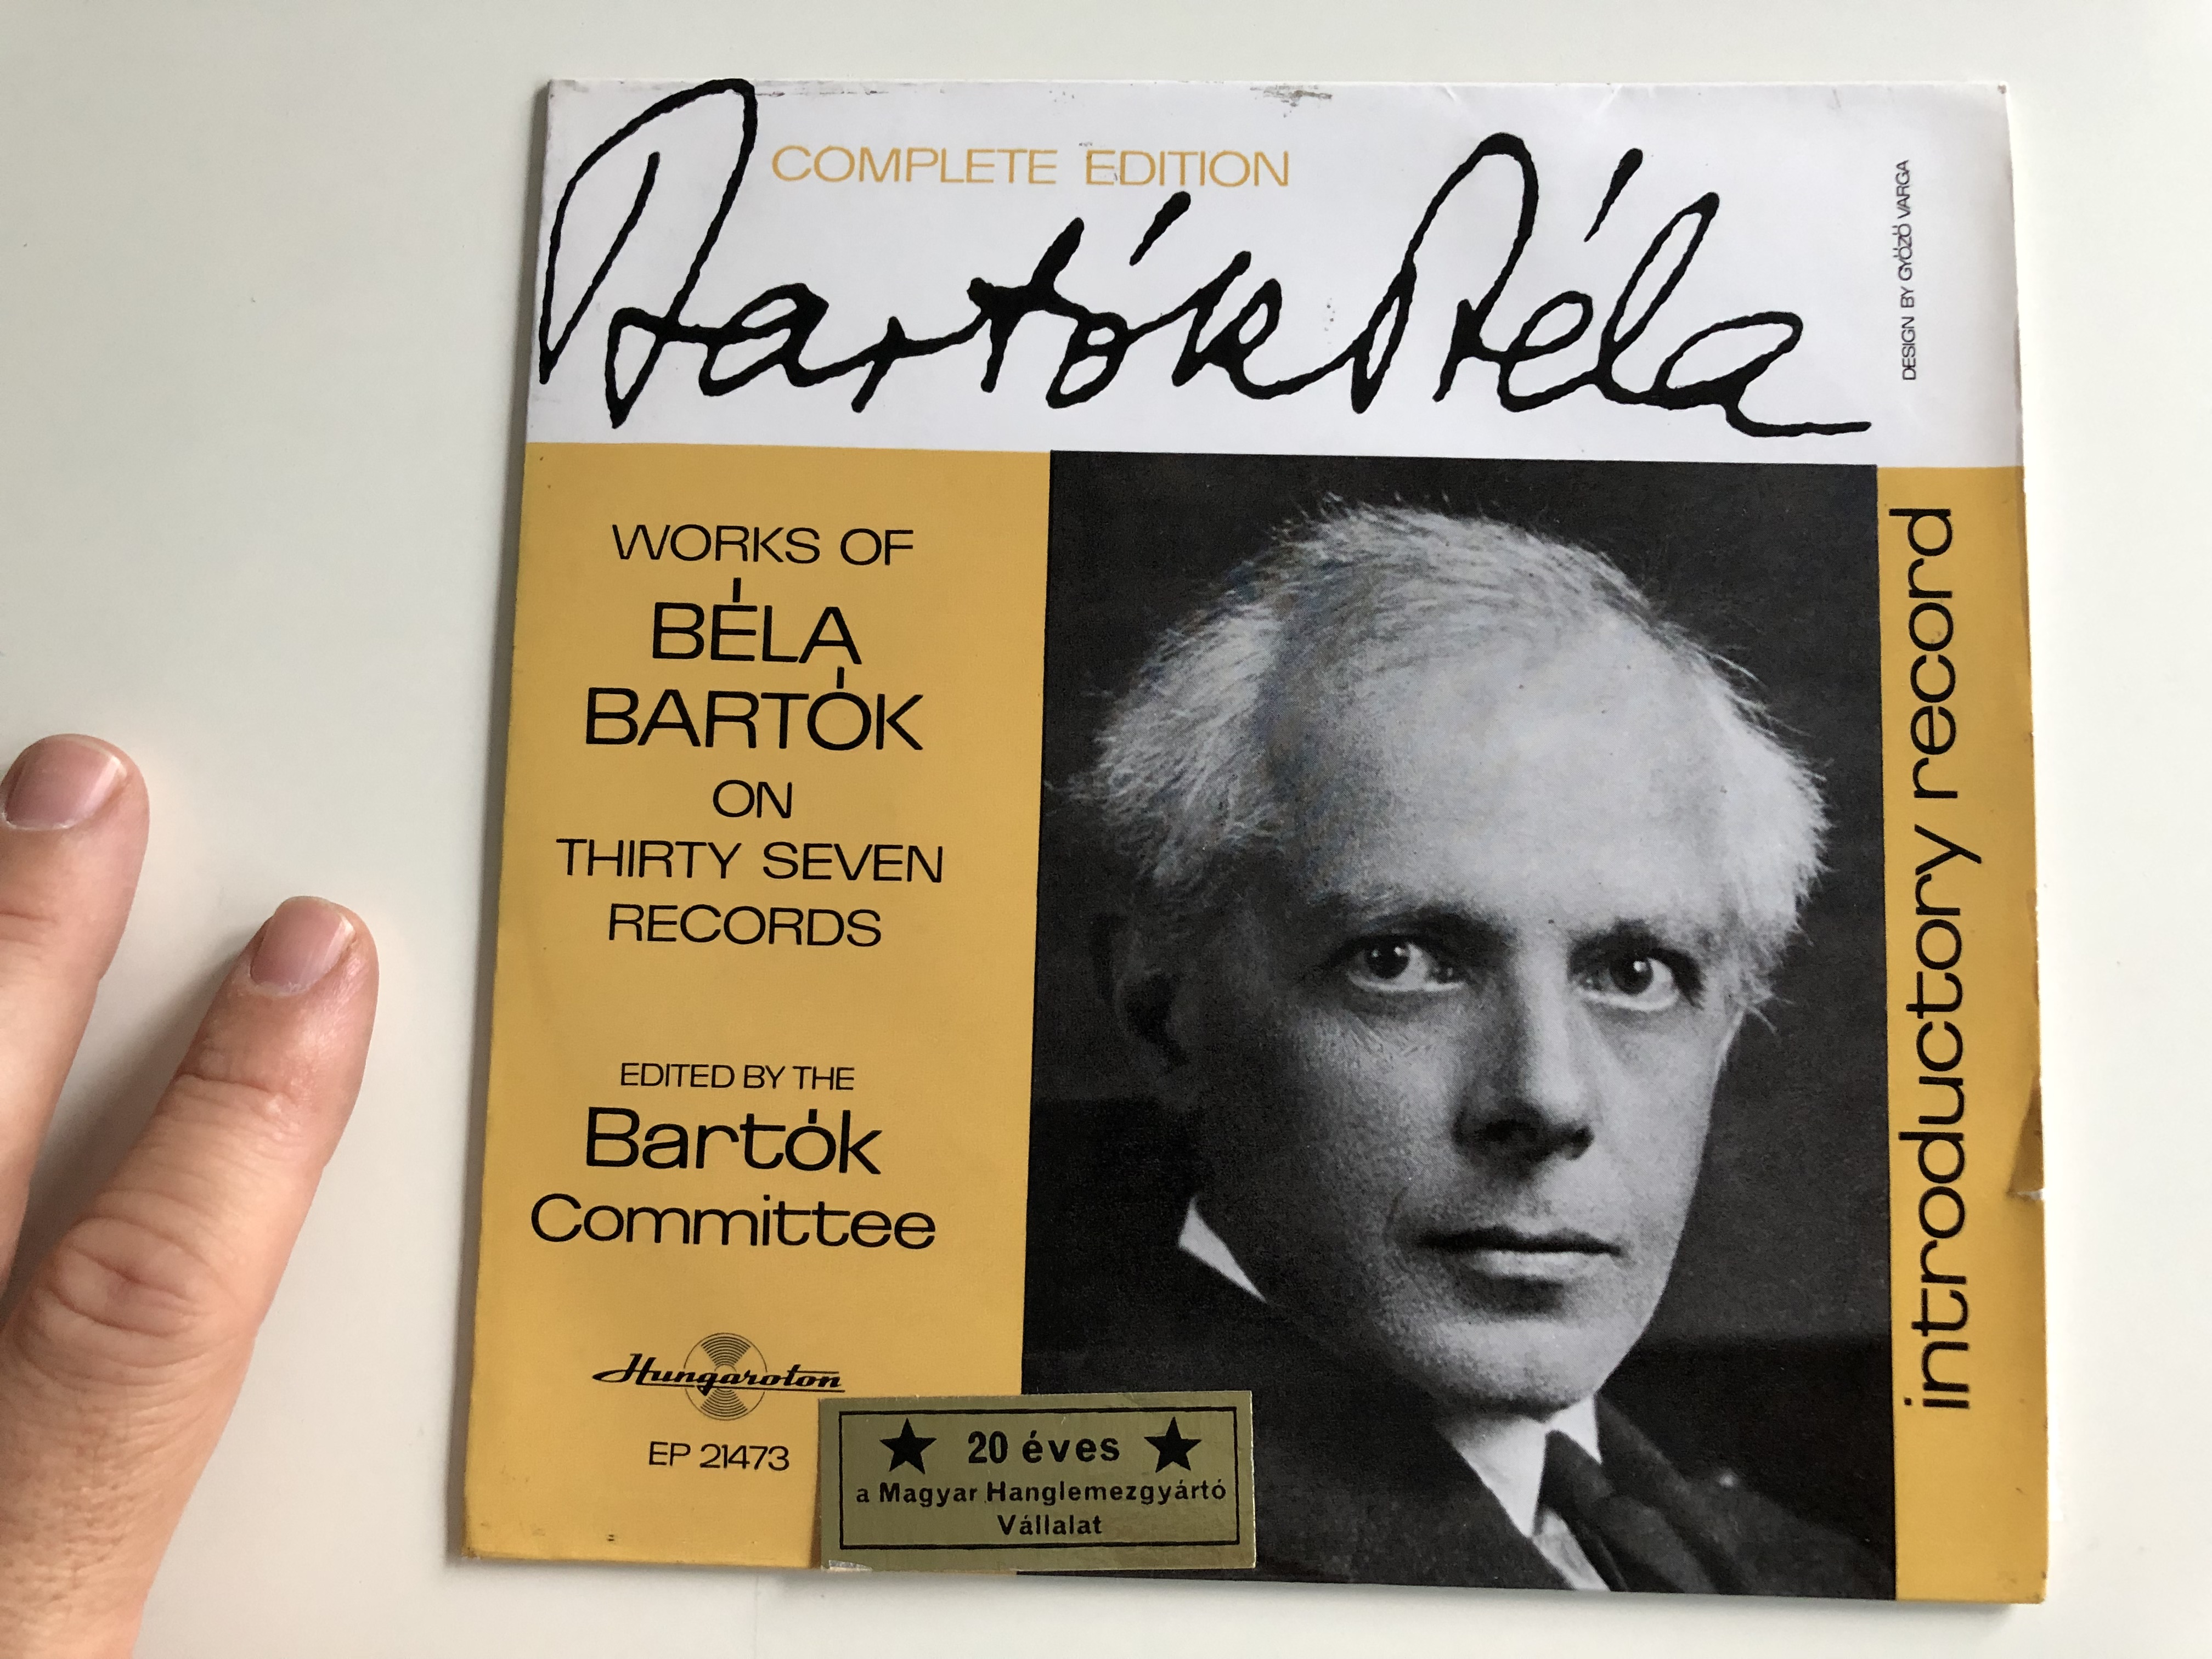 b-la-bart-k-introductory-record-works-of-bella-bartok-on-thirty-seven-records-complete-edition-hungaroton-lp-ep-21473-1-.jpg